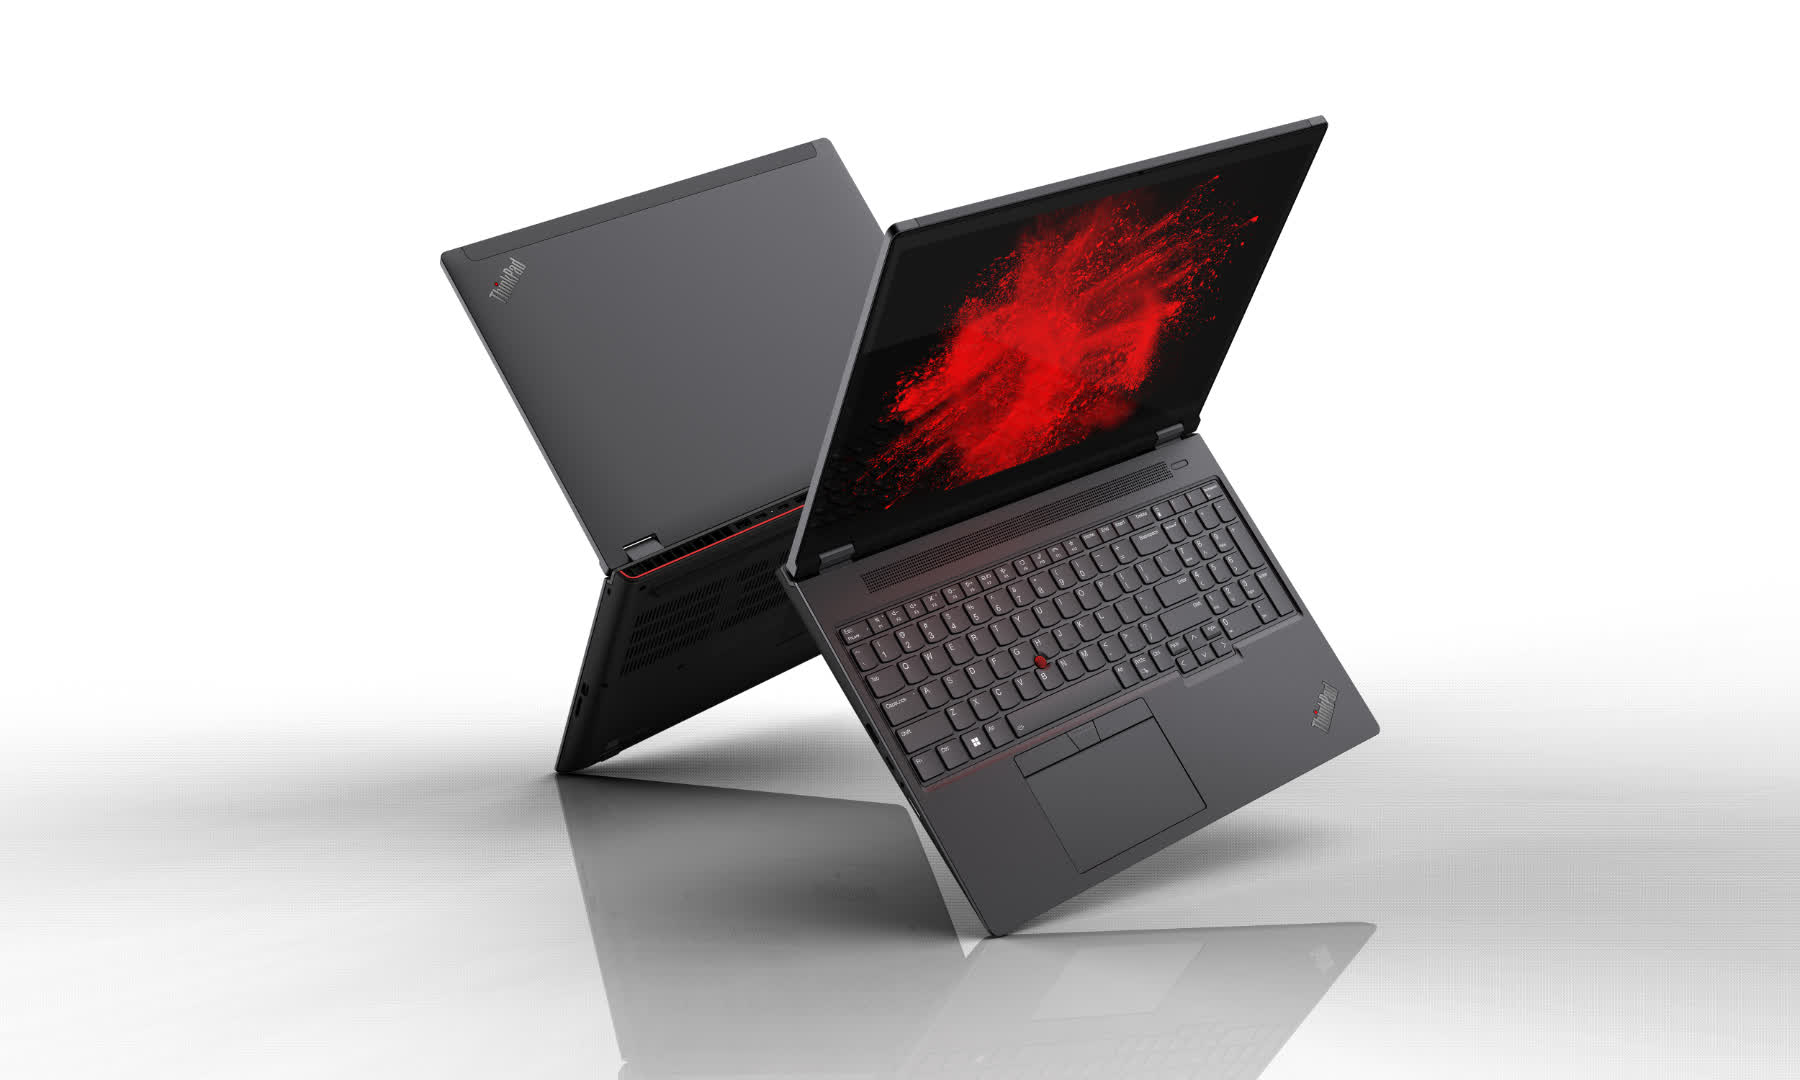 Lenovo ThinkPad P16 mobile workstation can pack up to a 5.0GHz 16-core CPU and 16GB dGPU